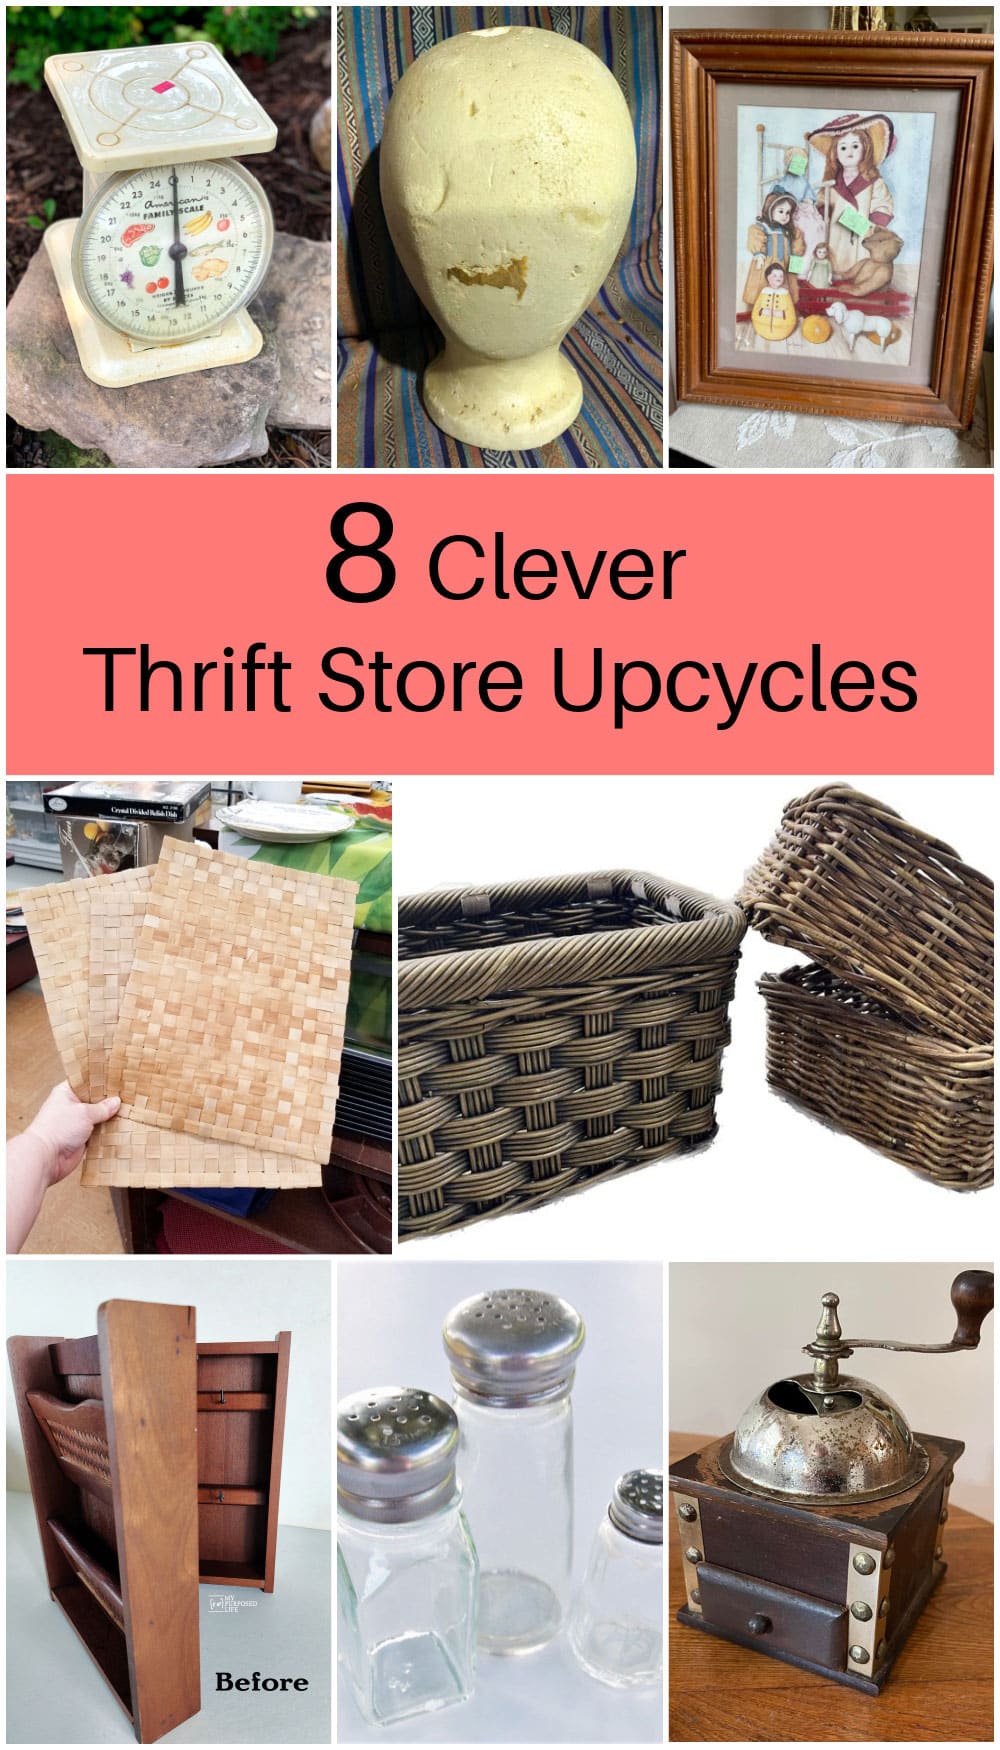 Items found at the thrift store that can be repurposed into trendy and inexpensive home decor.